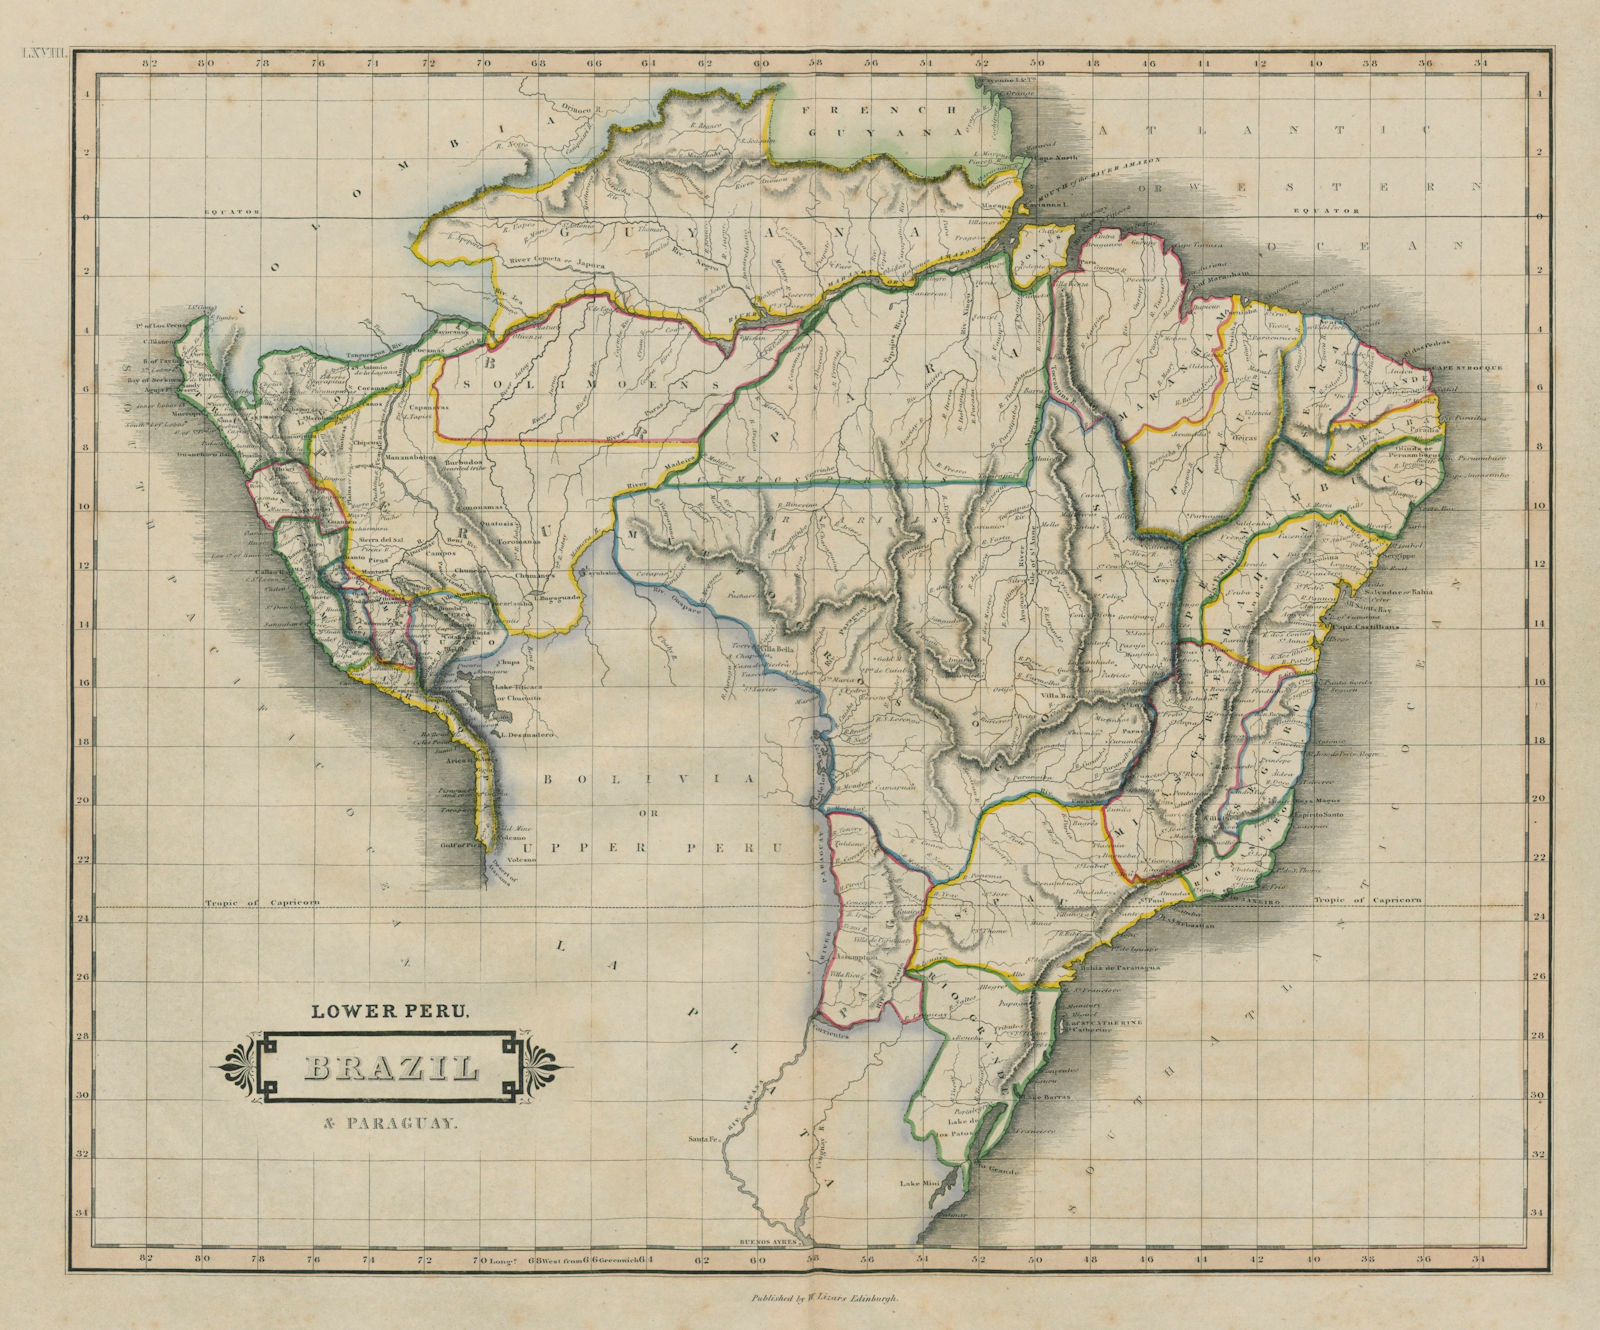 Associate Product Lower Peru, Brazil & Paraguay. Central South America. LIZARS 1842 old map